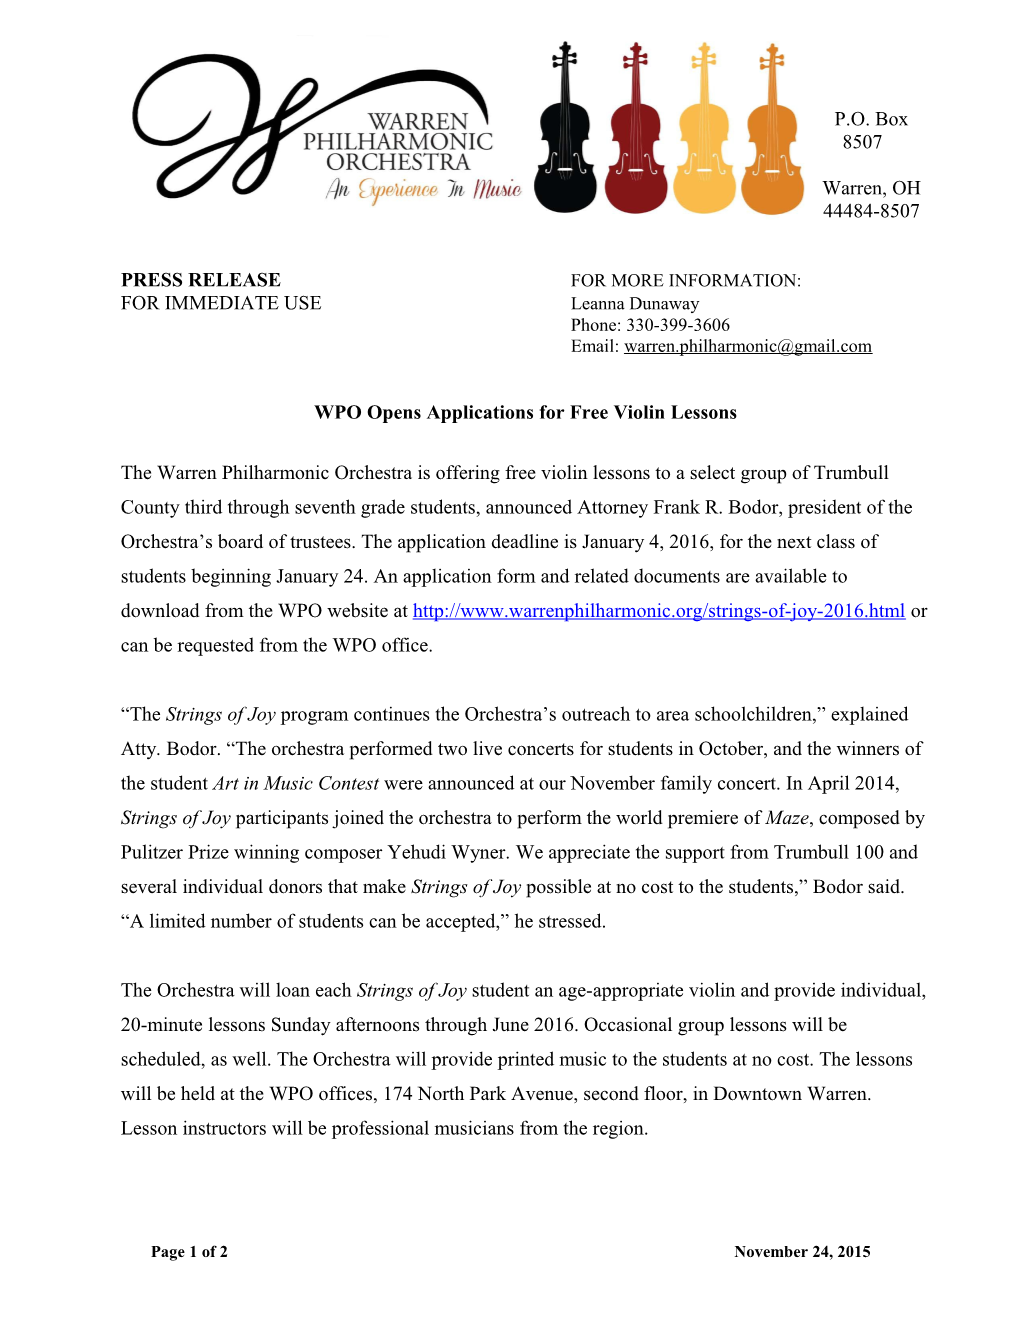 WPO Press Release: WPO Opens Applications for Free Violin Lessons